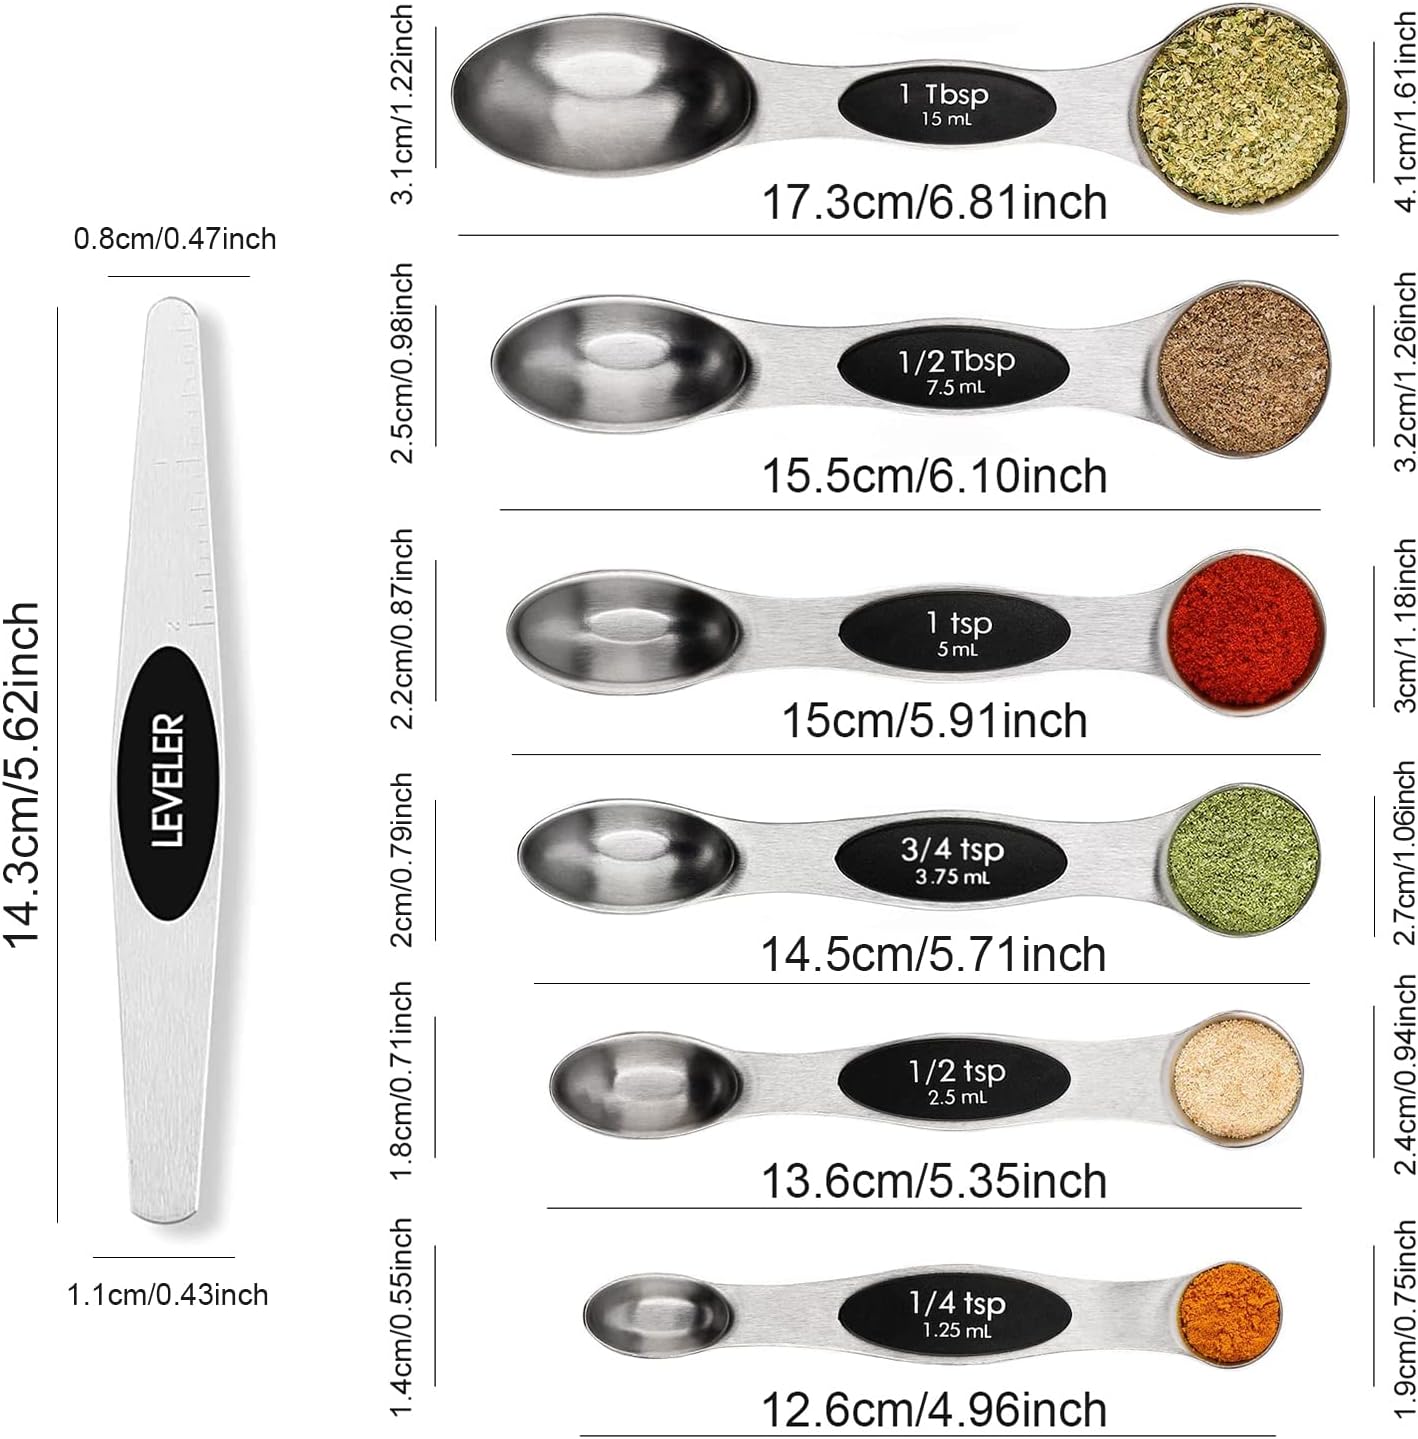 Magnetic Measuring Spoons Set Stainless Steel with Leveler, Stackable Metal Tablespoon Measure Spoon for Baking, Cups and Spoon Set Kitchen Gadgets Apartment Essentials Fits in Spice Jars